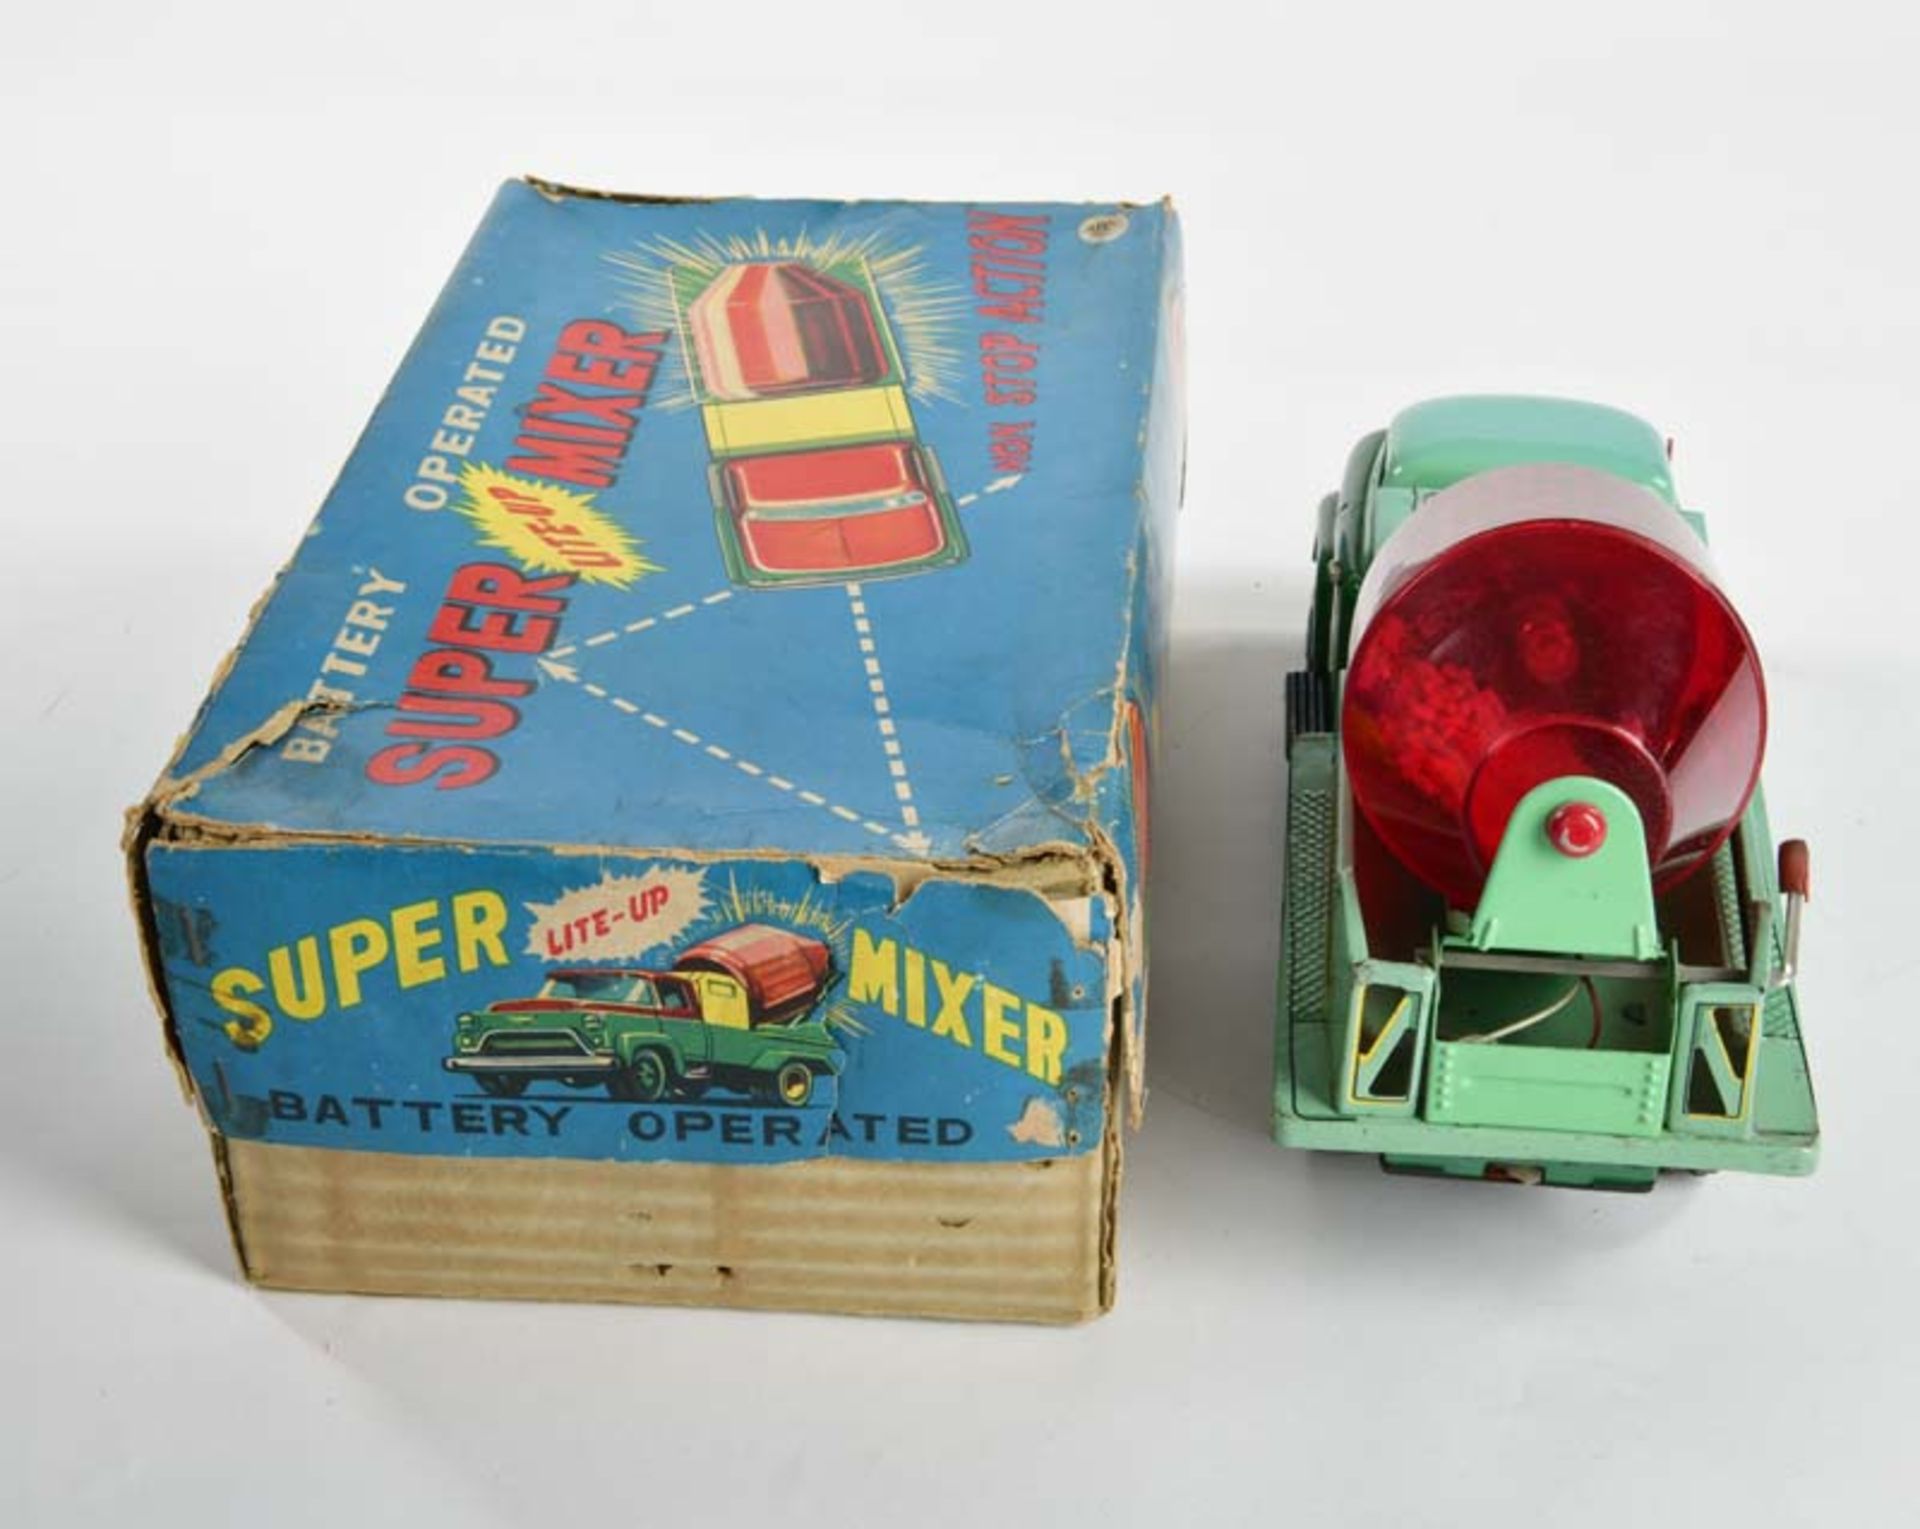 Modern Toys, Super Mixer, Japan, 30 cm, tin, function not checked, min. paint d., box C 3, C 2 - Image 3 of 3